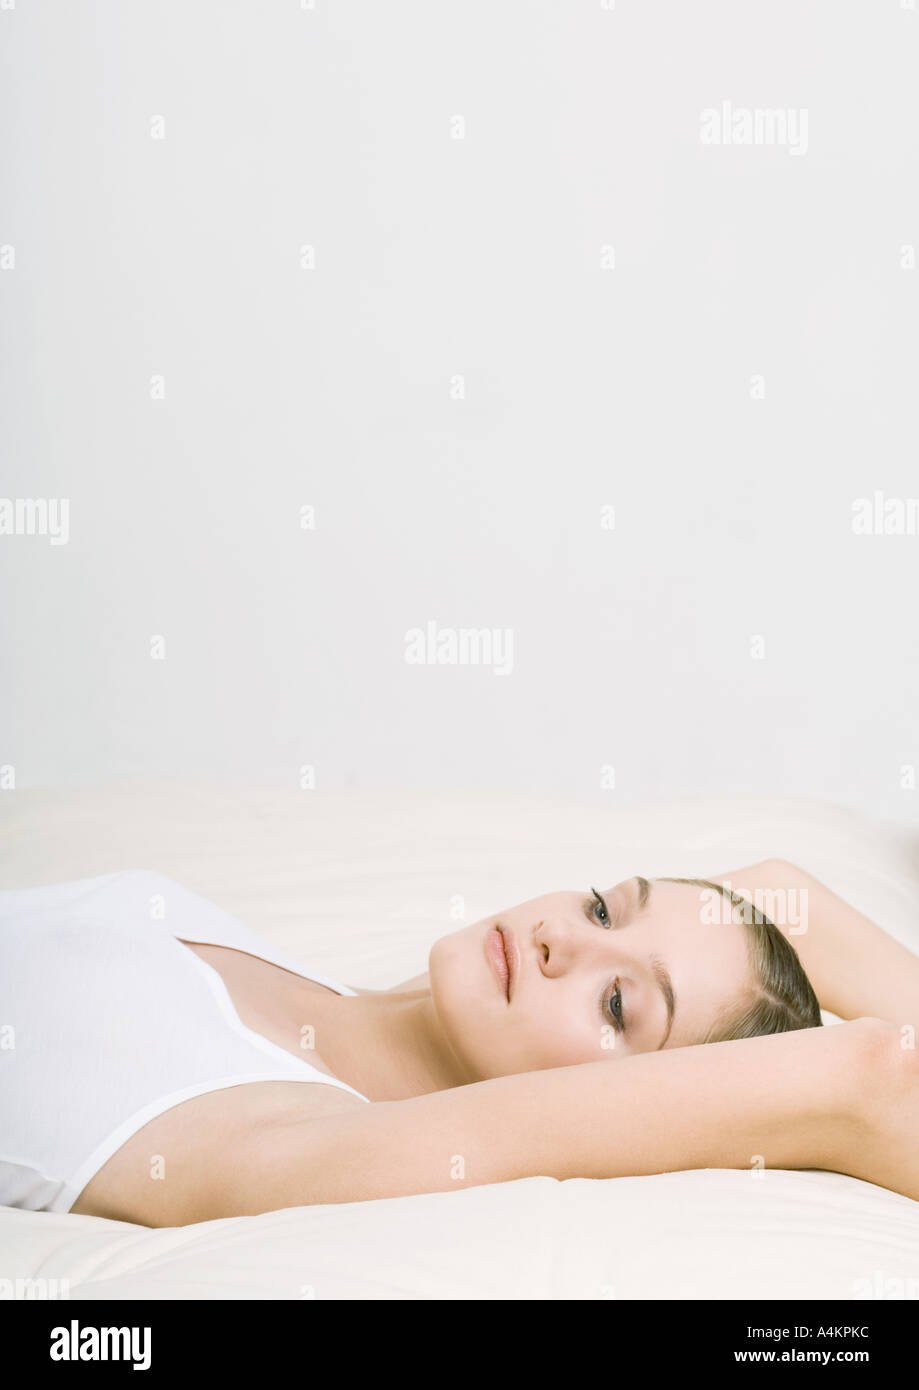 Woman lying back on bed with arms over head Stock Photo